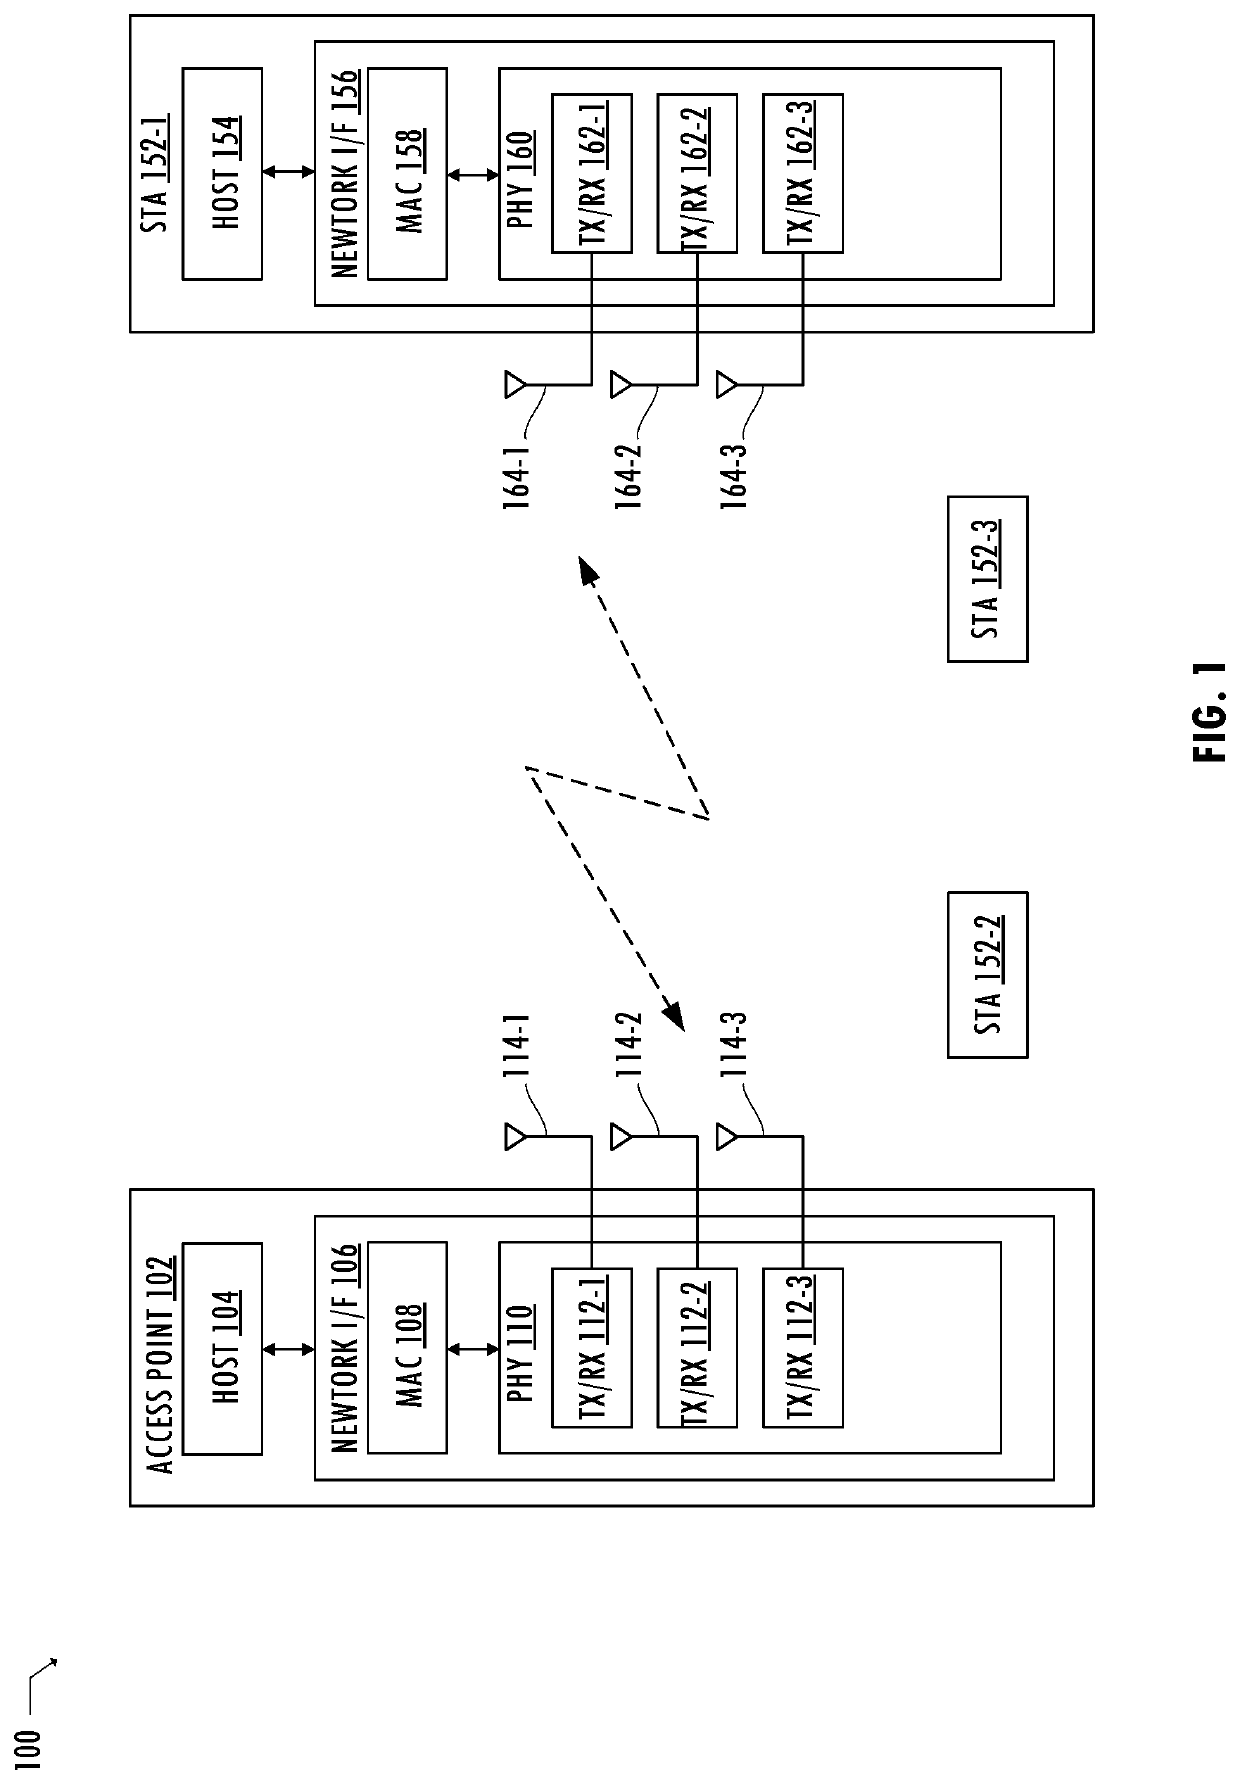 Beaconing and capability and basic service set parameter announcement for multi-band operation